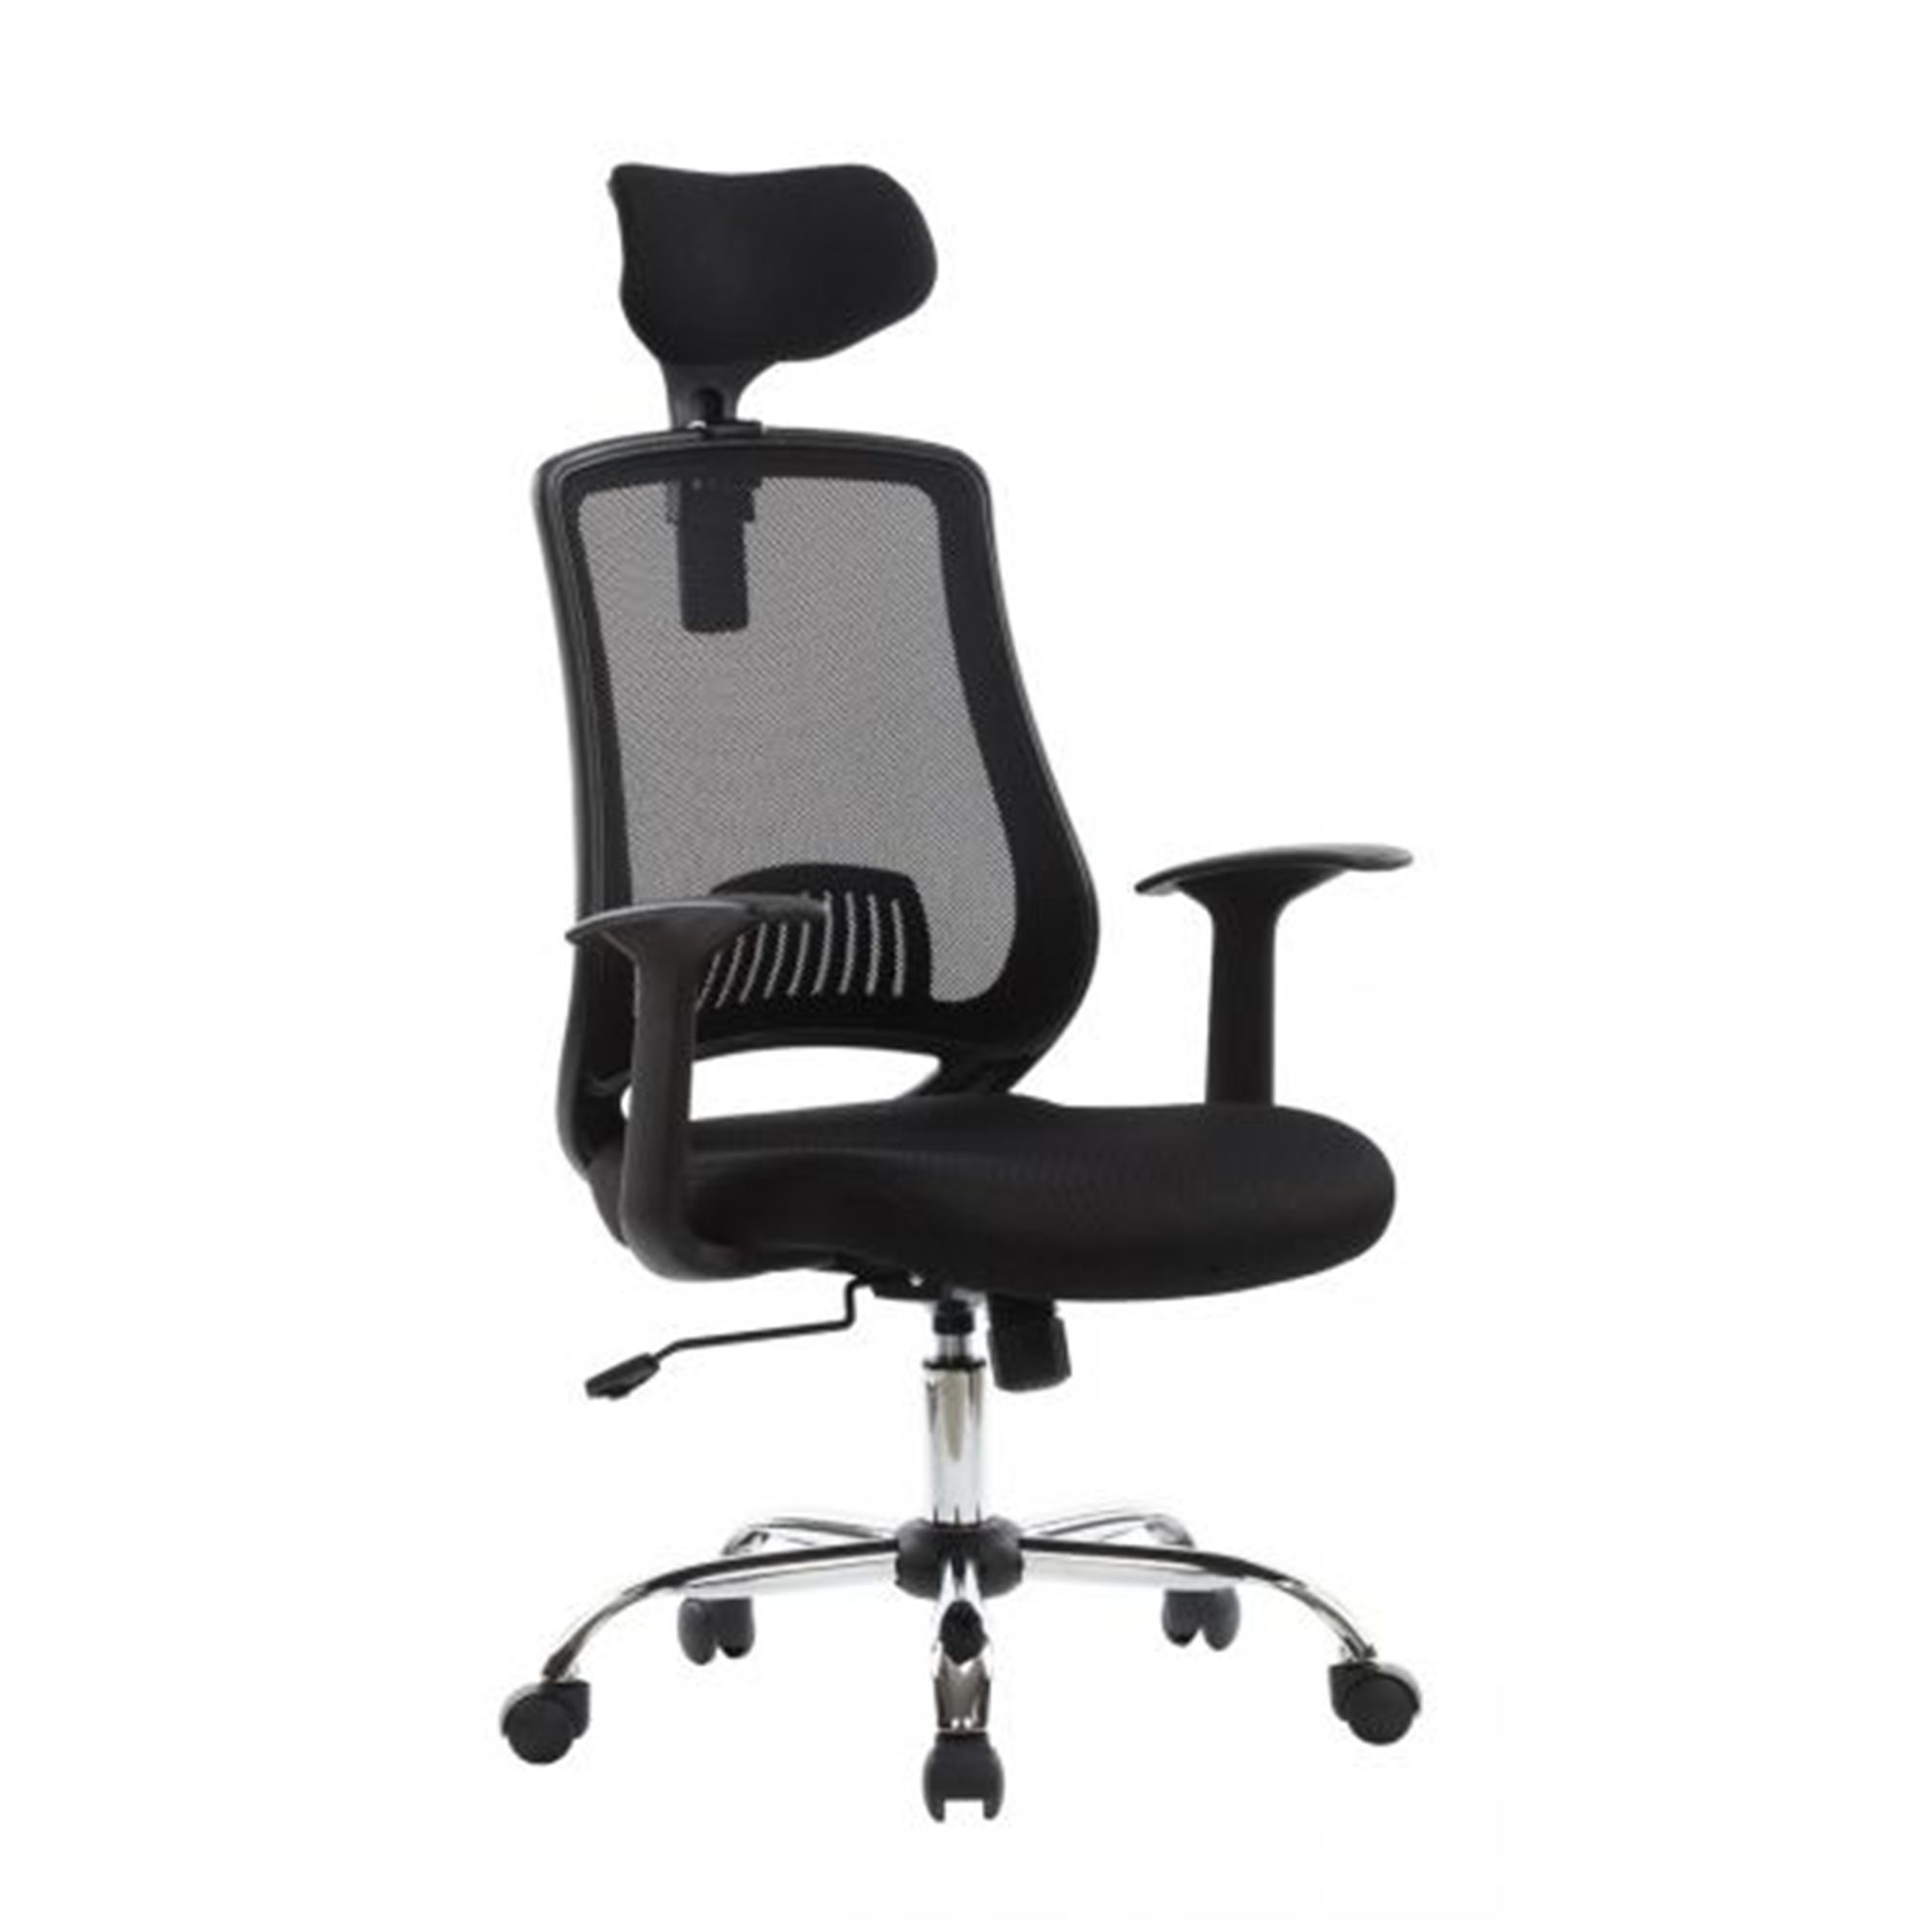 Alphason Office Chairs Florida Black Mesh Chair - Office Chairs